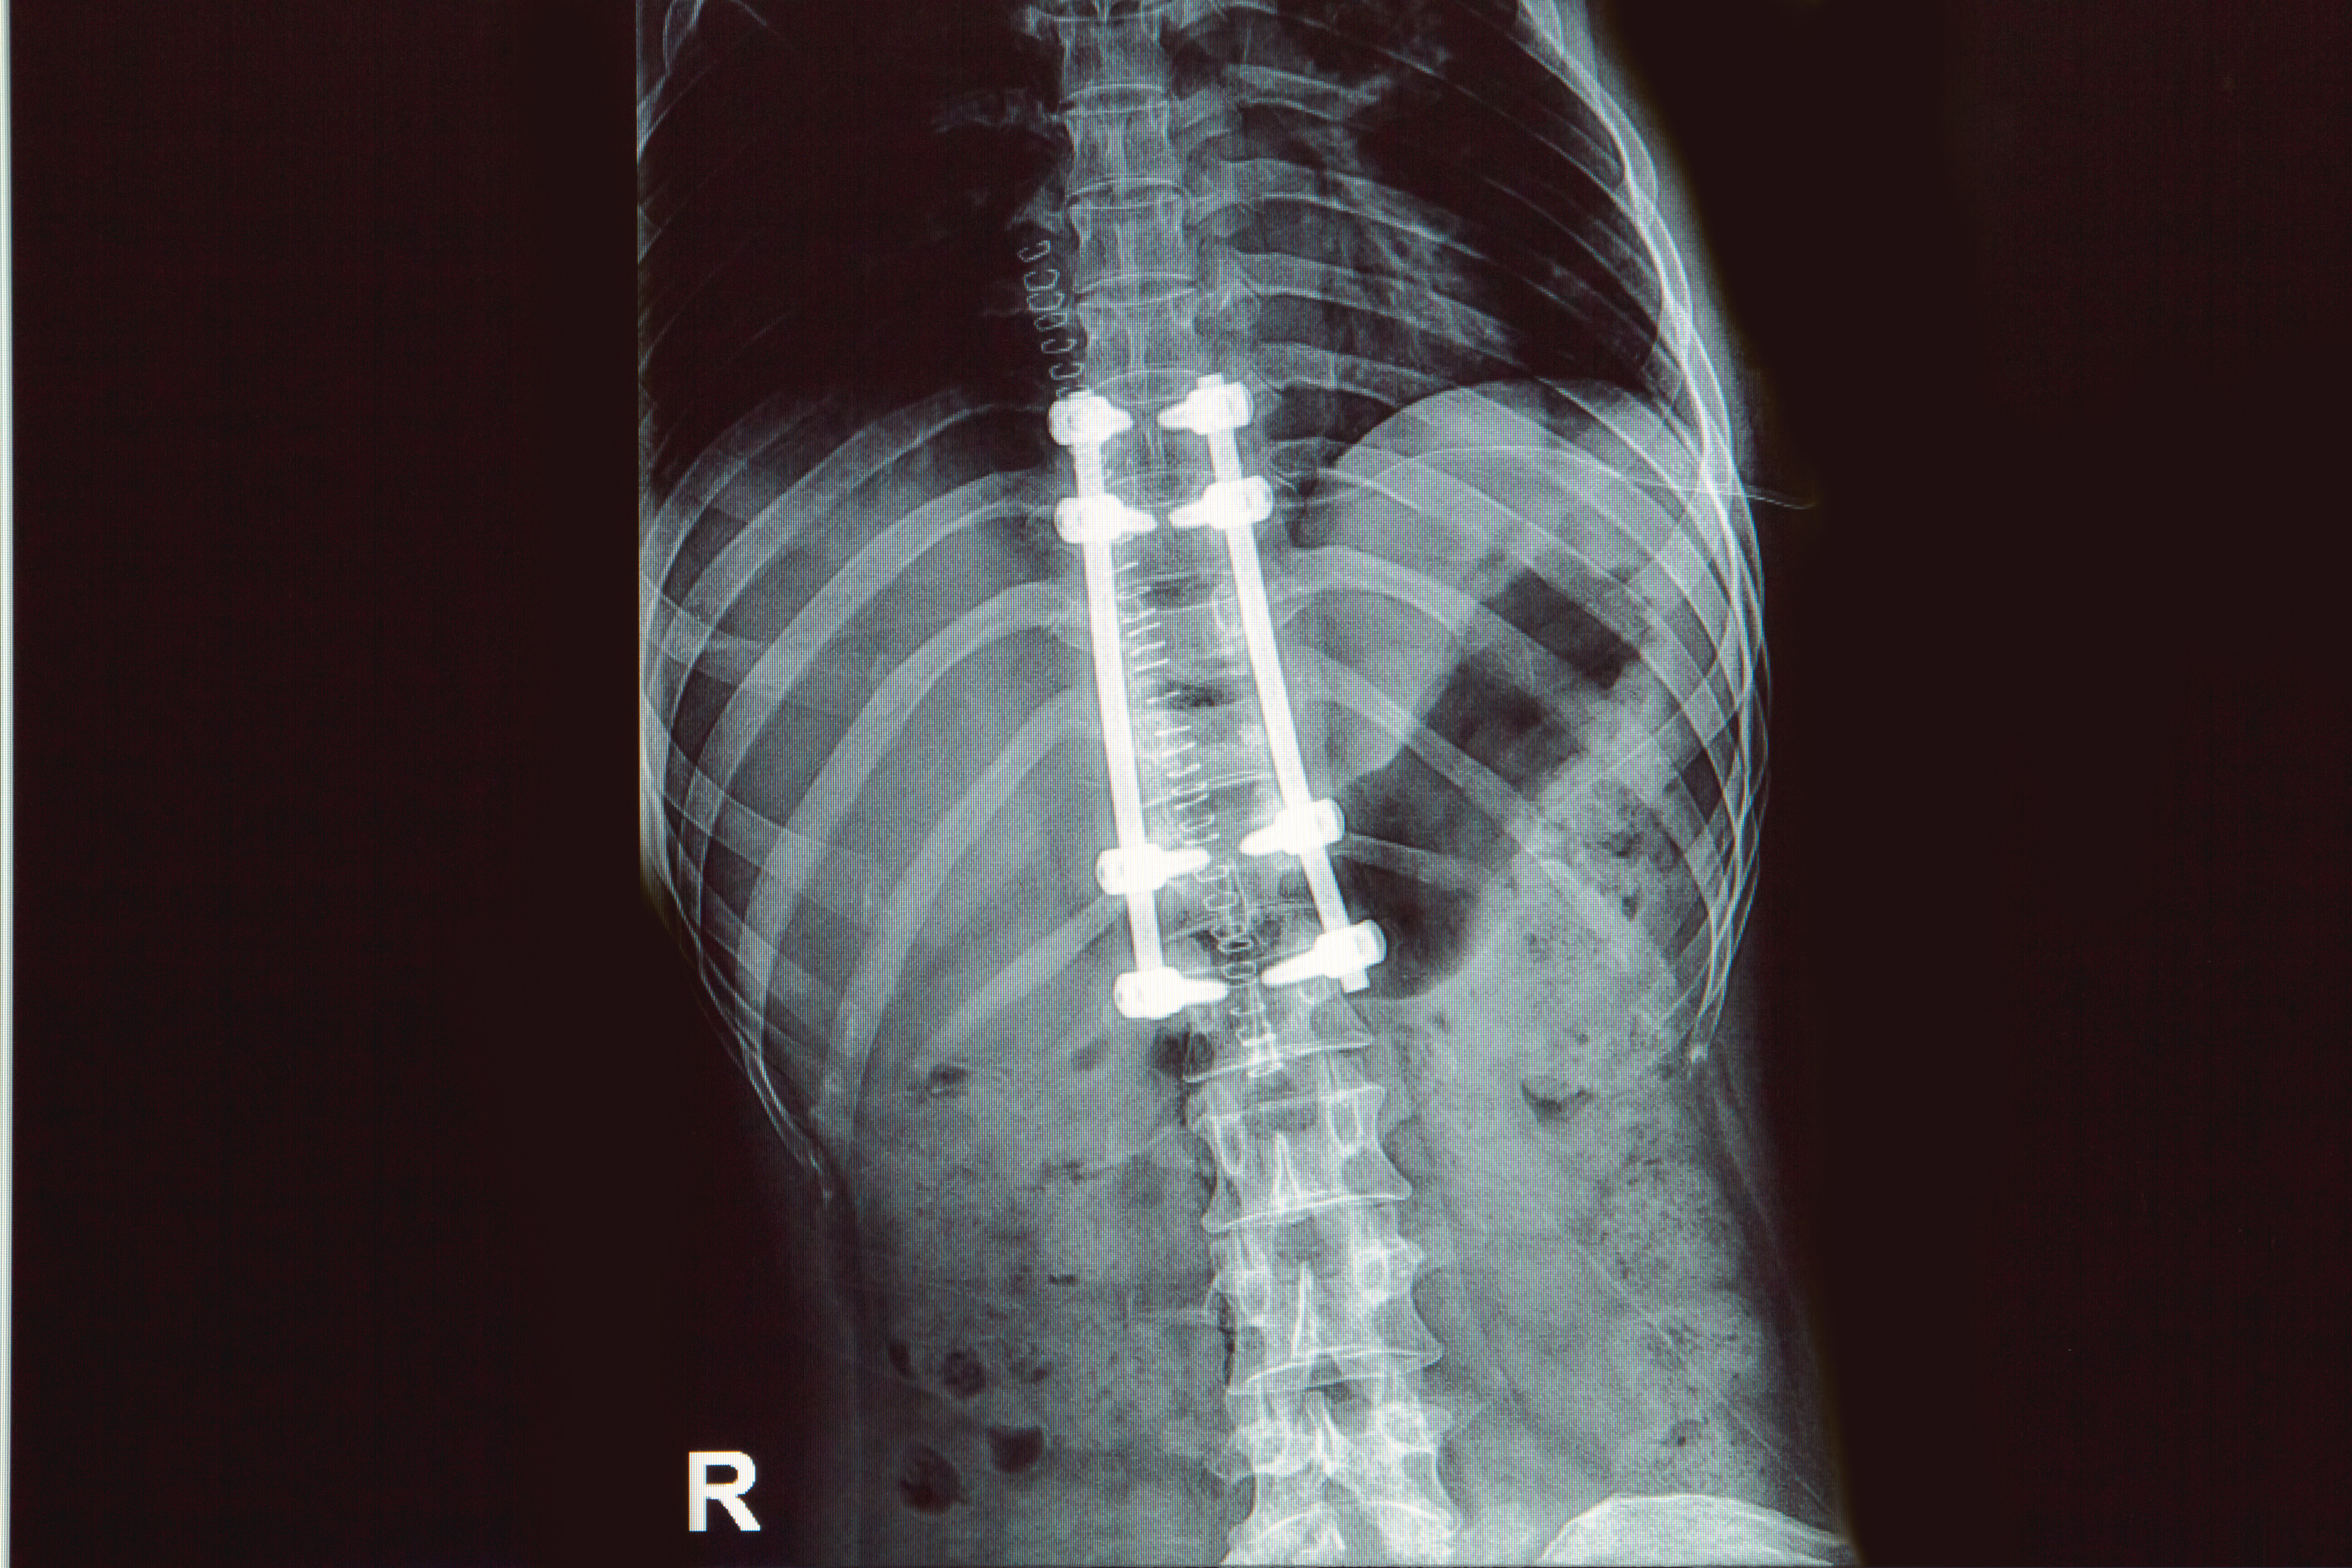 Spinal Fusion Instrumentation Removal: Pros and Cons